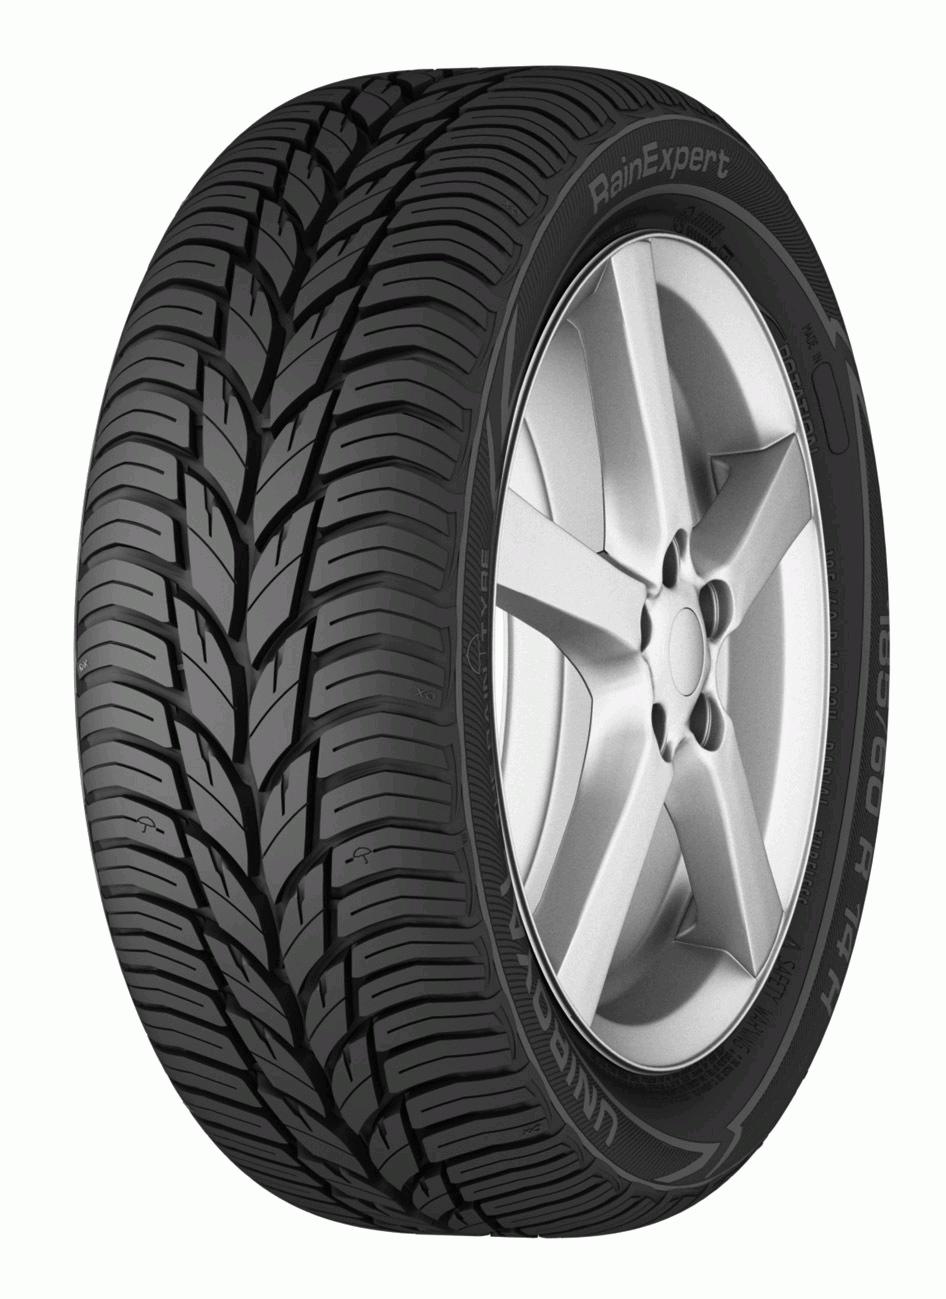 Uniroyal RainExpert and - Tests Tyre Reviews